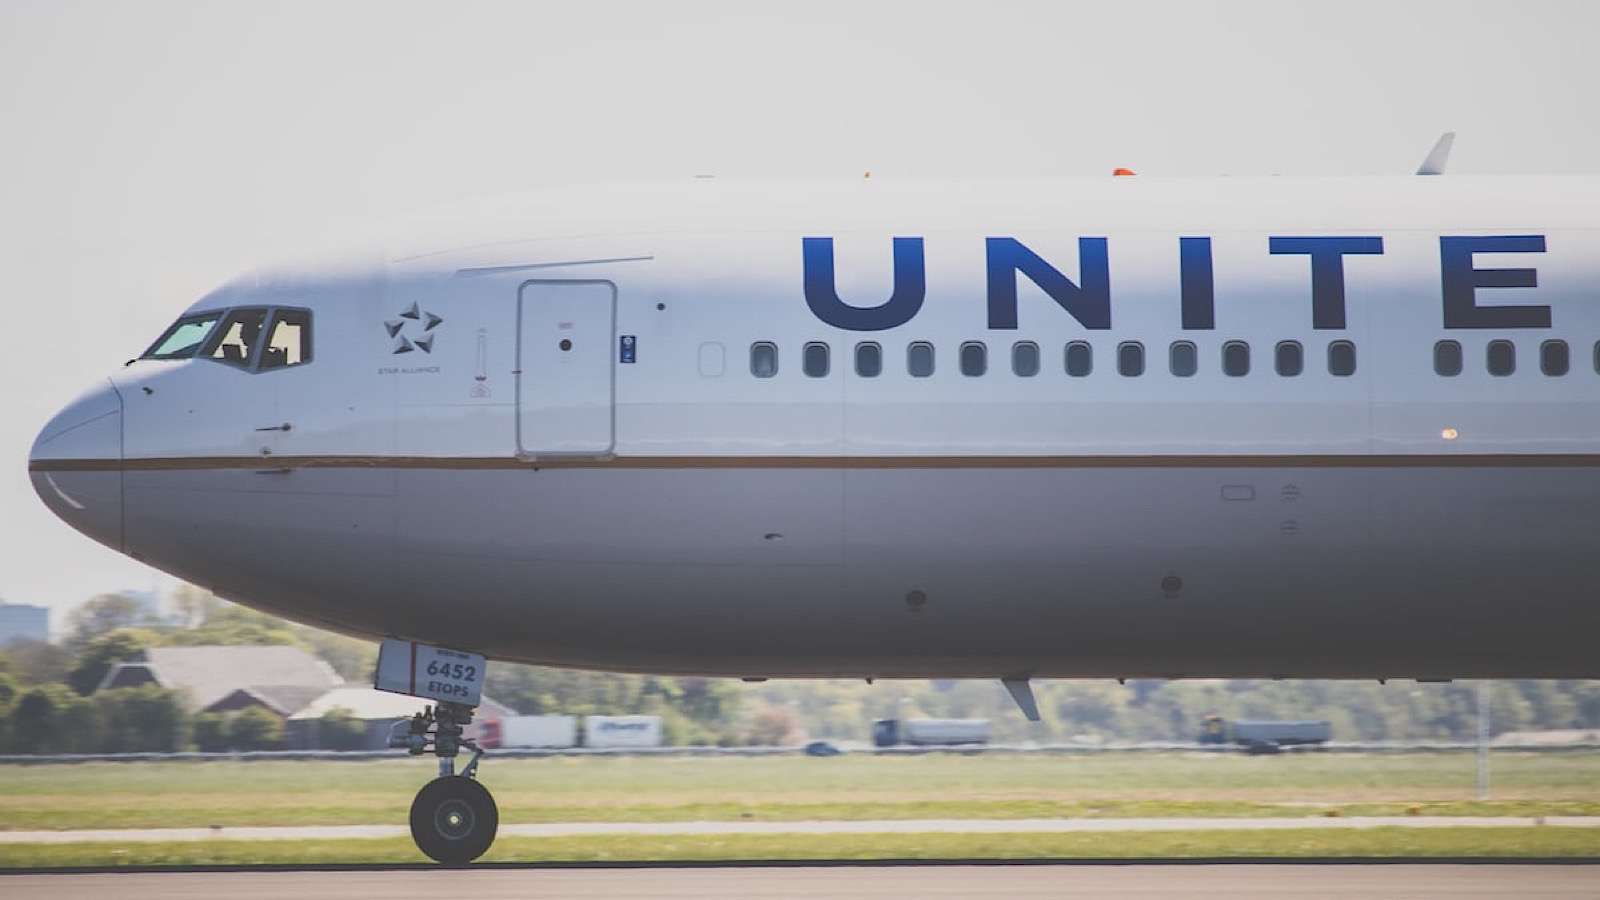 united airlines is launching a new boarding system for plane passengers